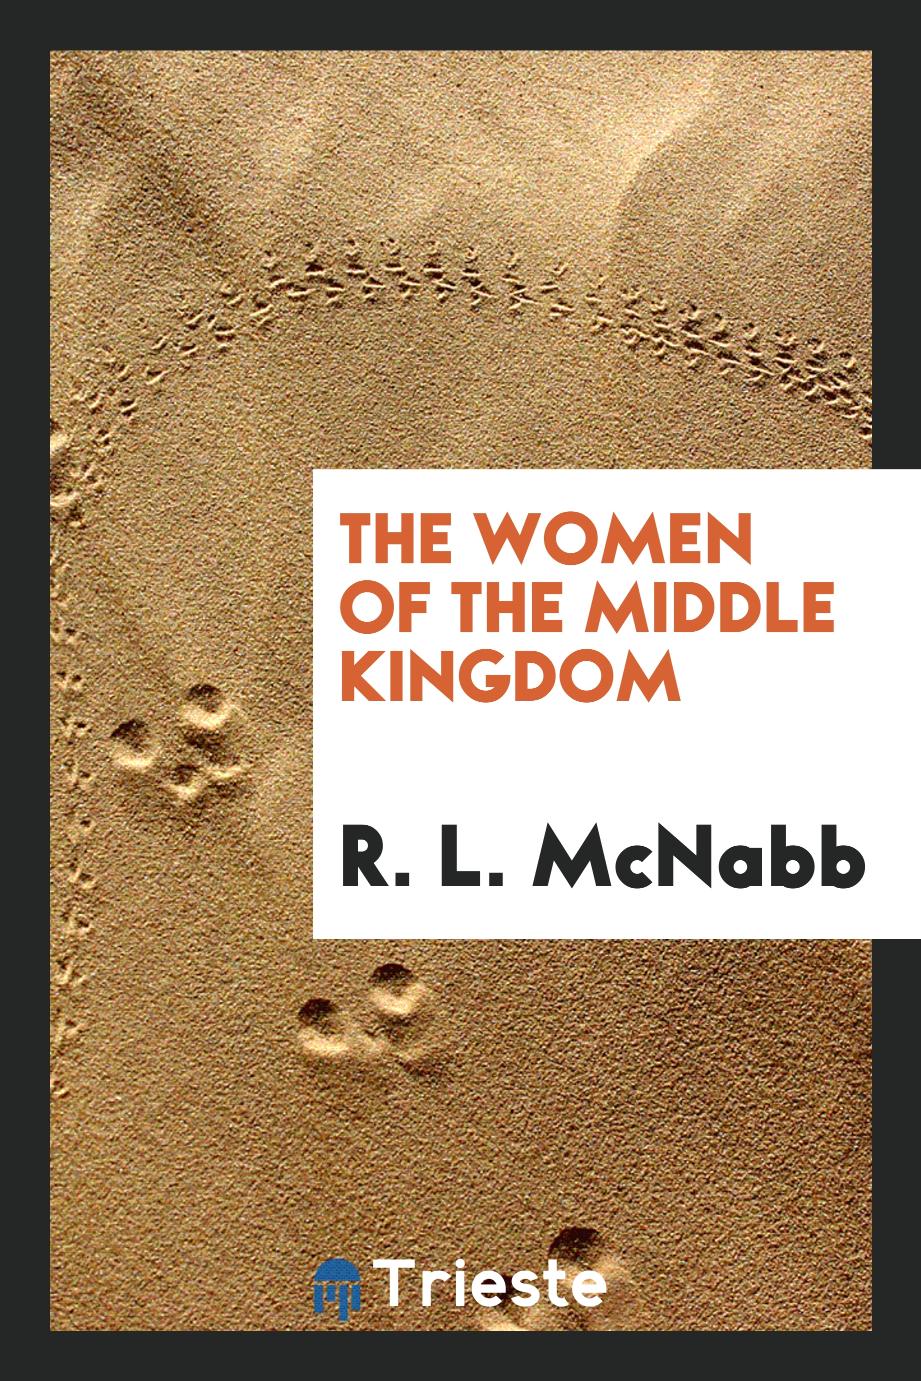 The women of the Middle Kingdom